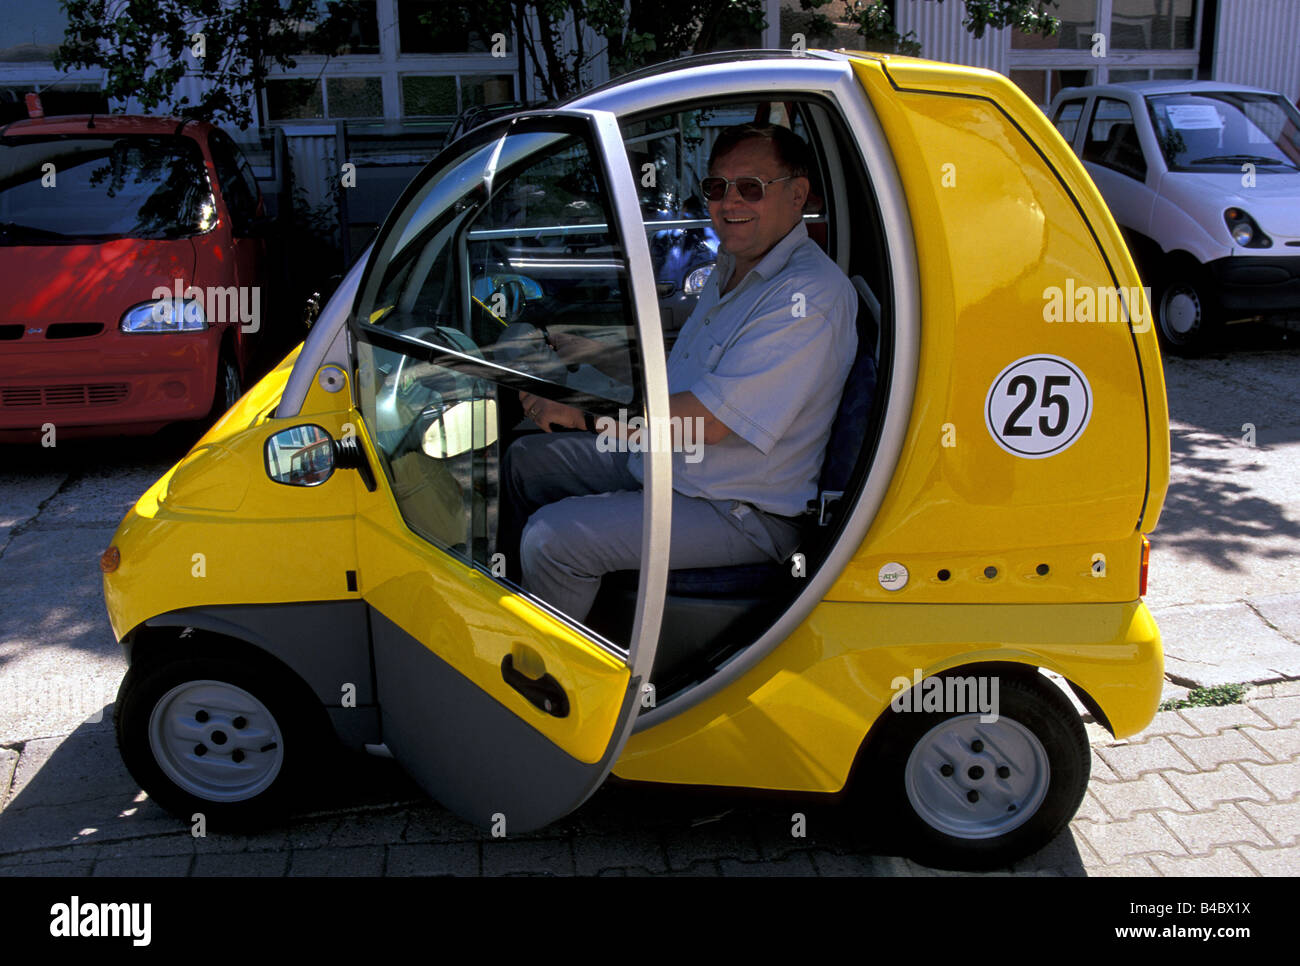 Car, Electric vehicle, Model 'Charly' (Autotechnik Walther), Light approx. Stock Photo